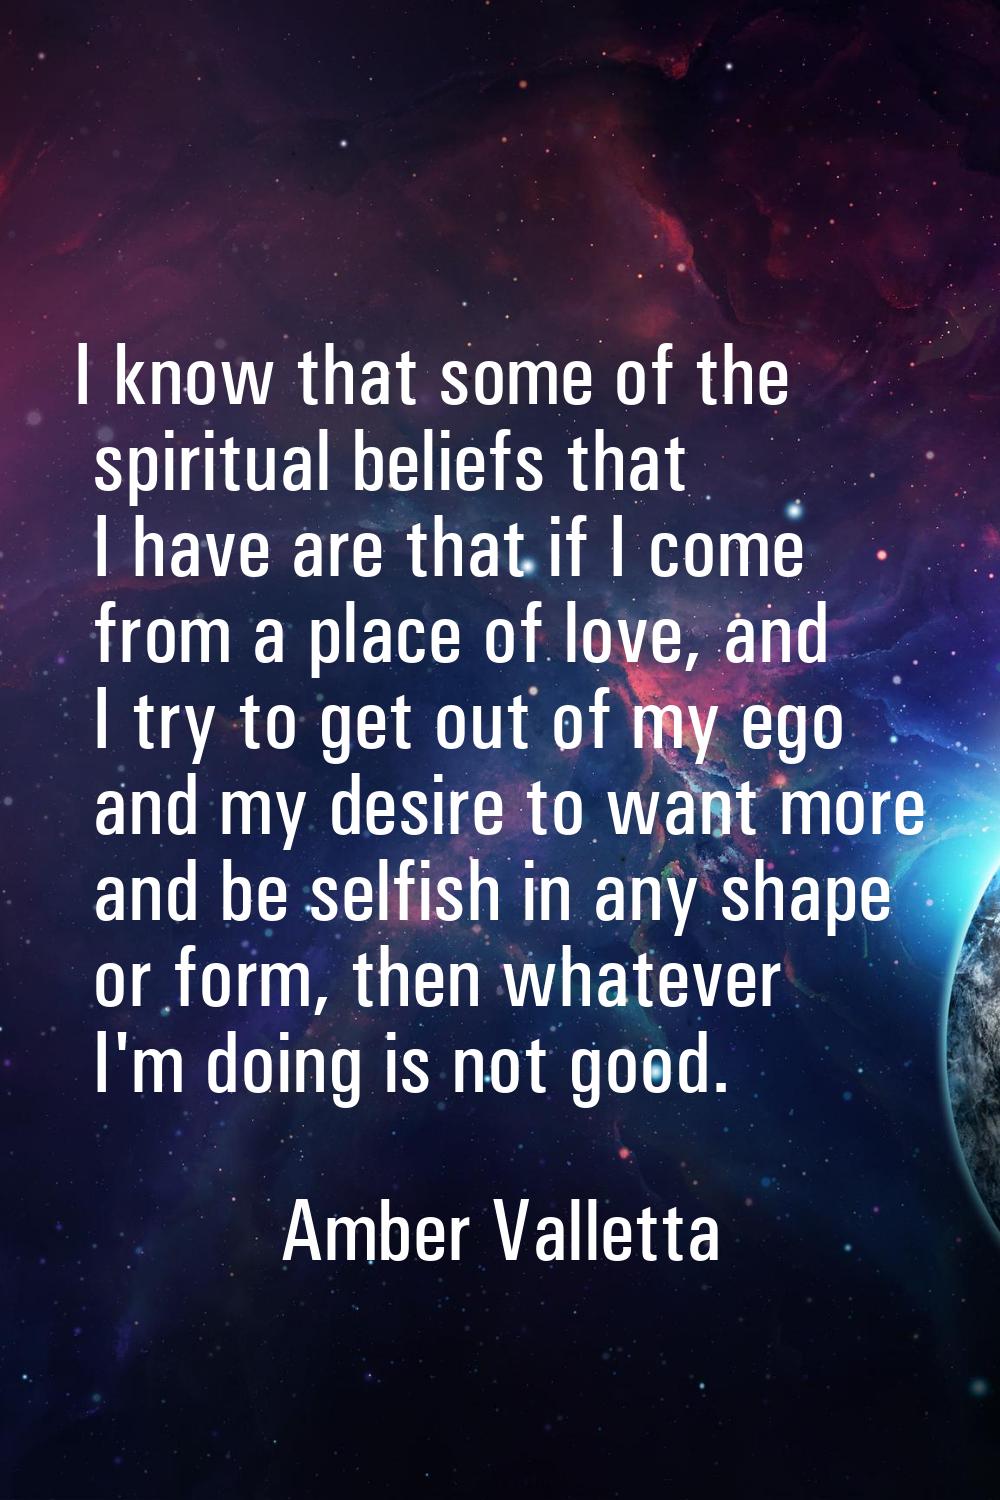 I know that some of the spiritual beliefs that I have are that if I come from a place of love, and 